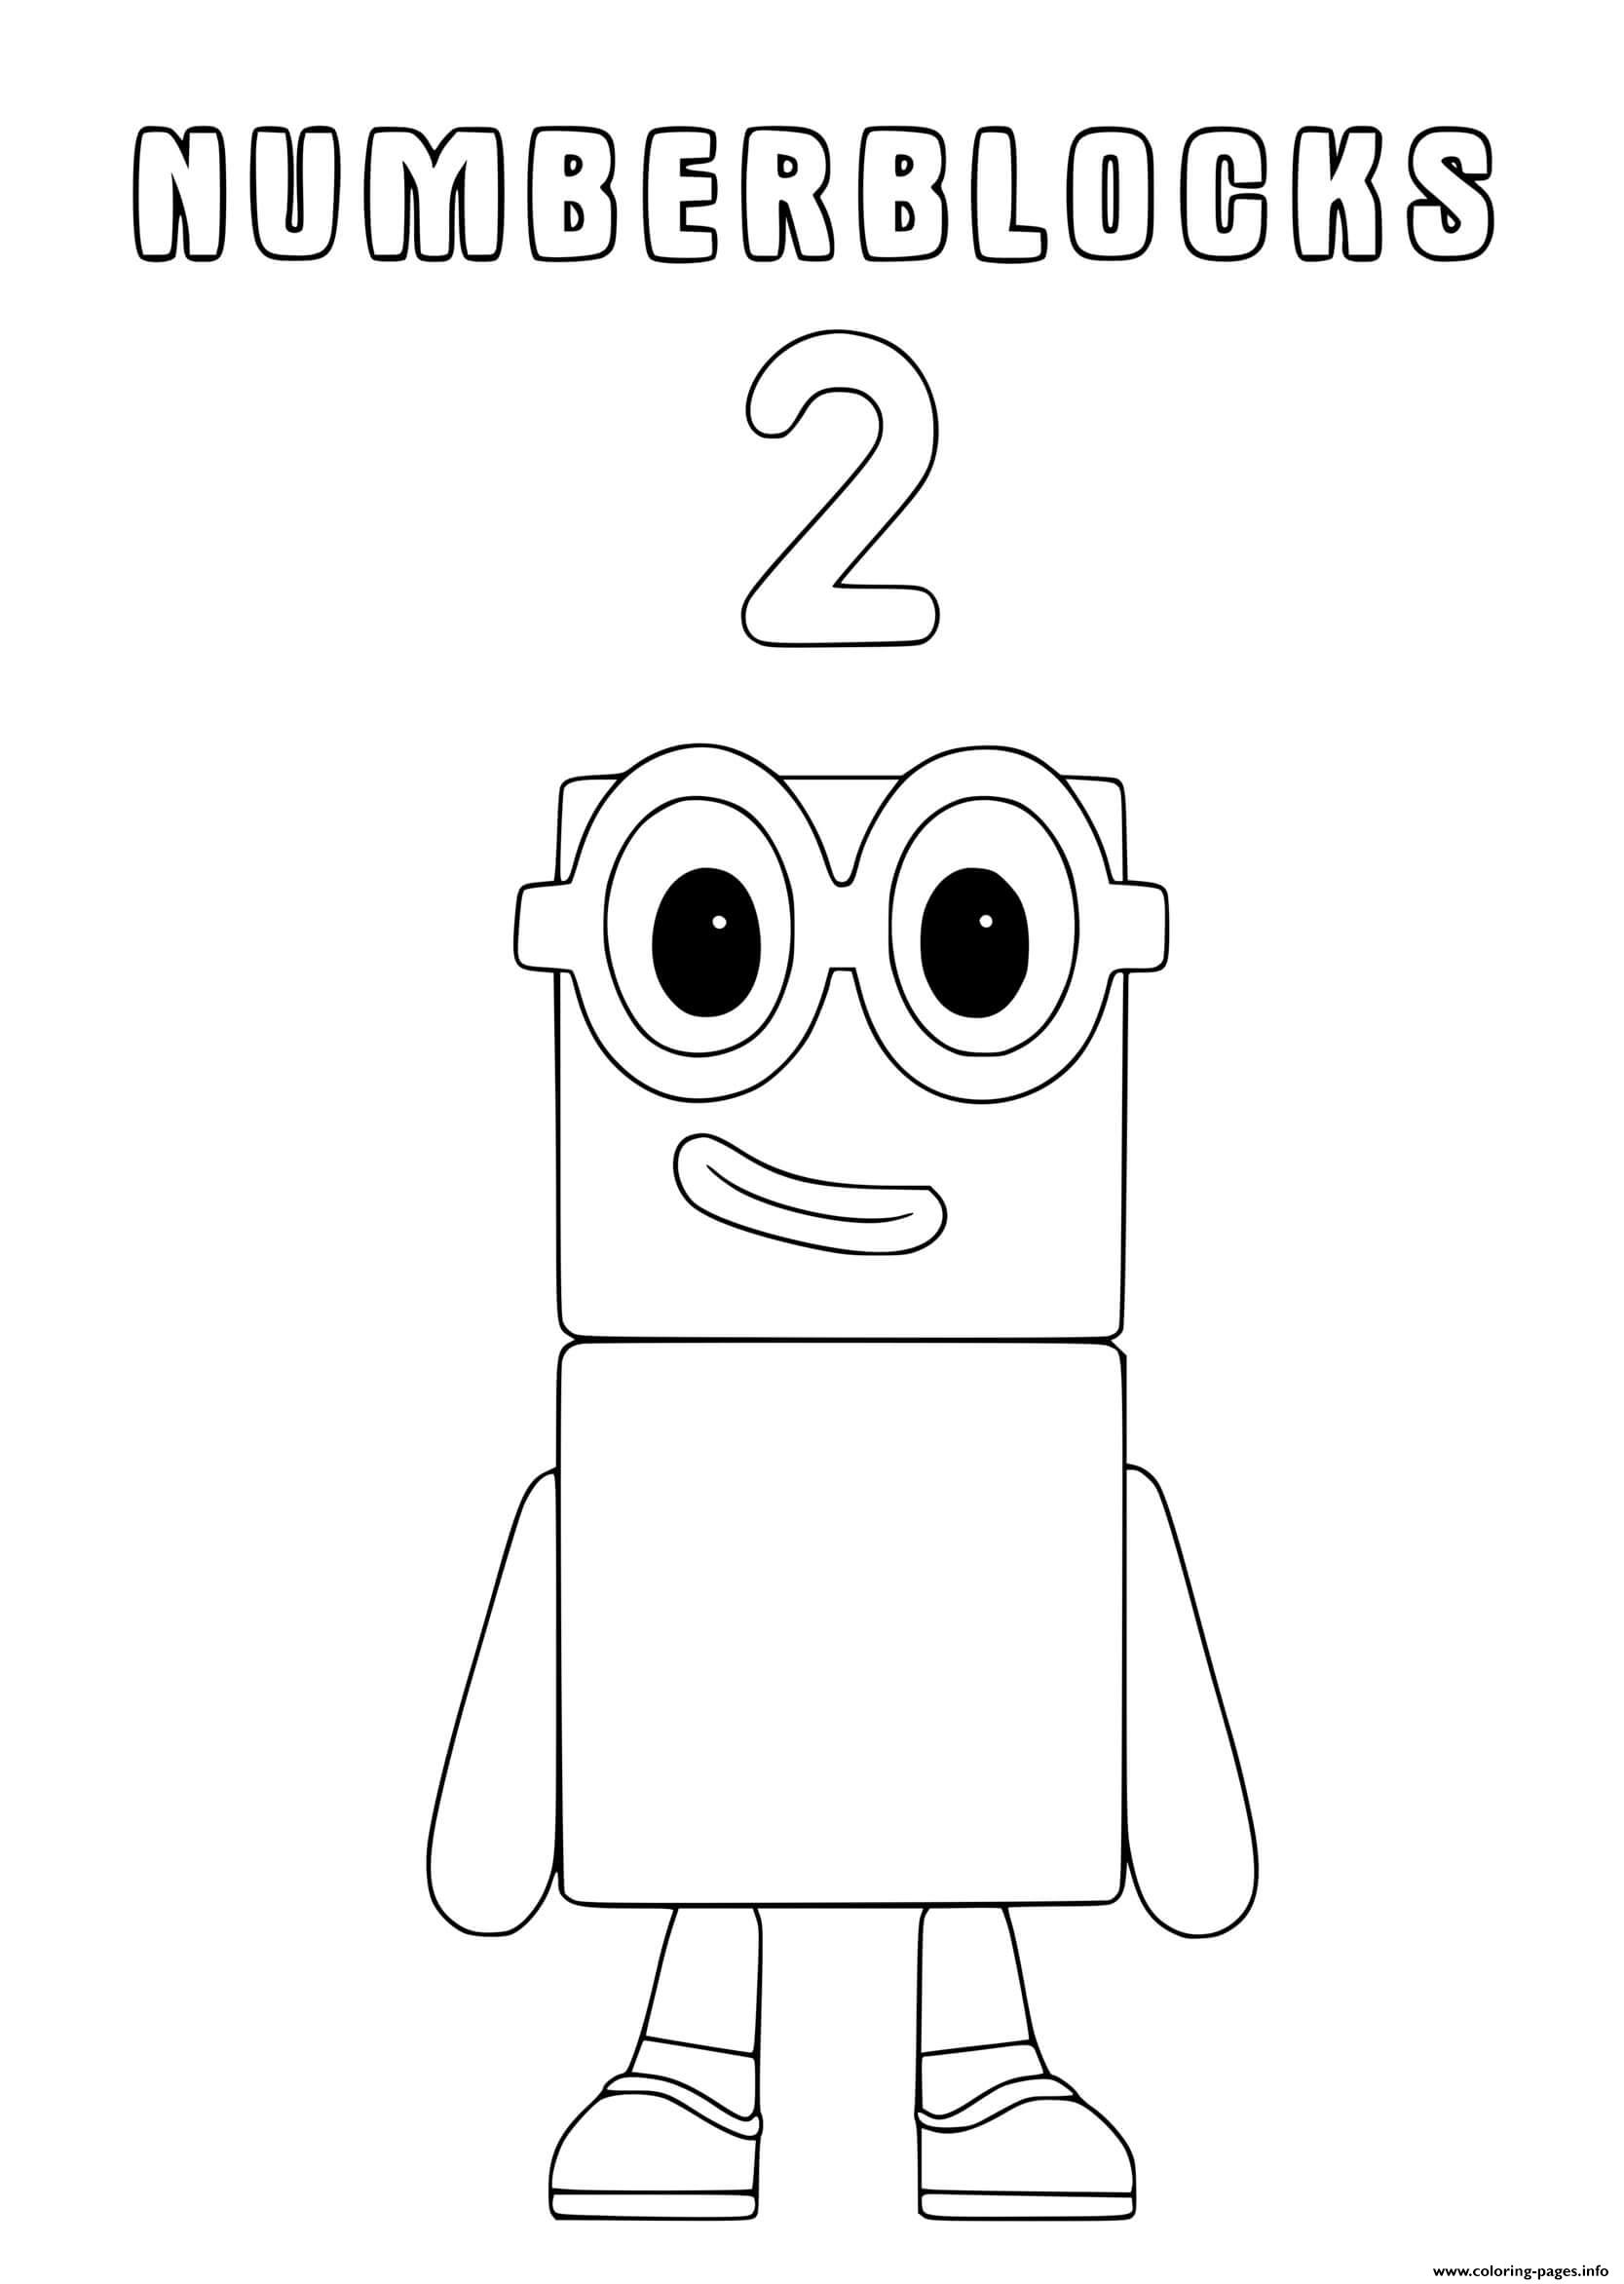 numberblocks-express-coloring-pages-printable-images-and-photos-finder